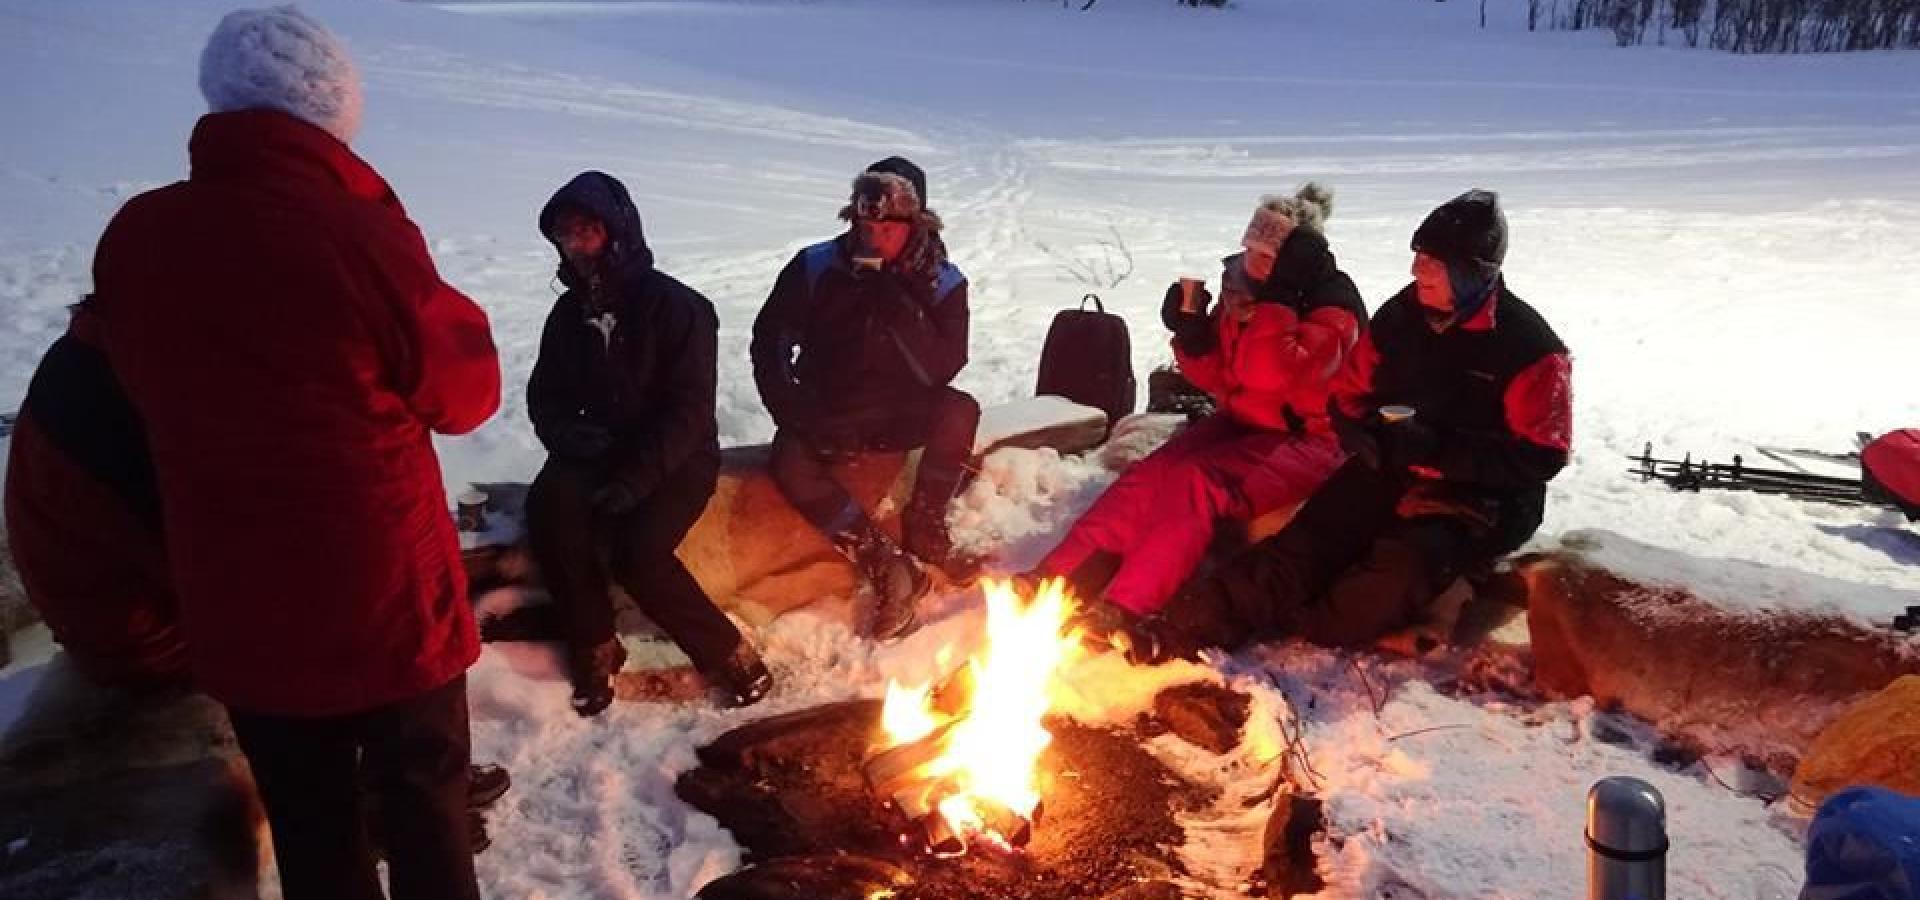 The Ultimate Outdoor Winter Party Guide Don T Let The Cold Weather Stop You